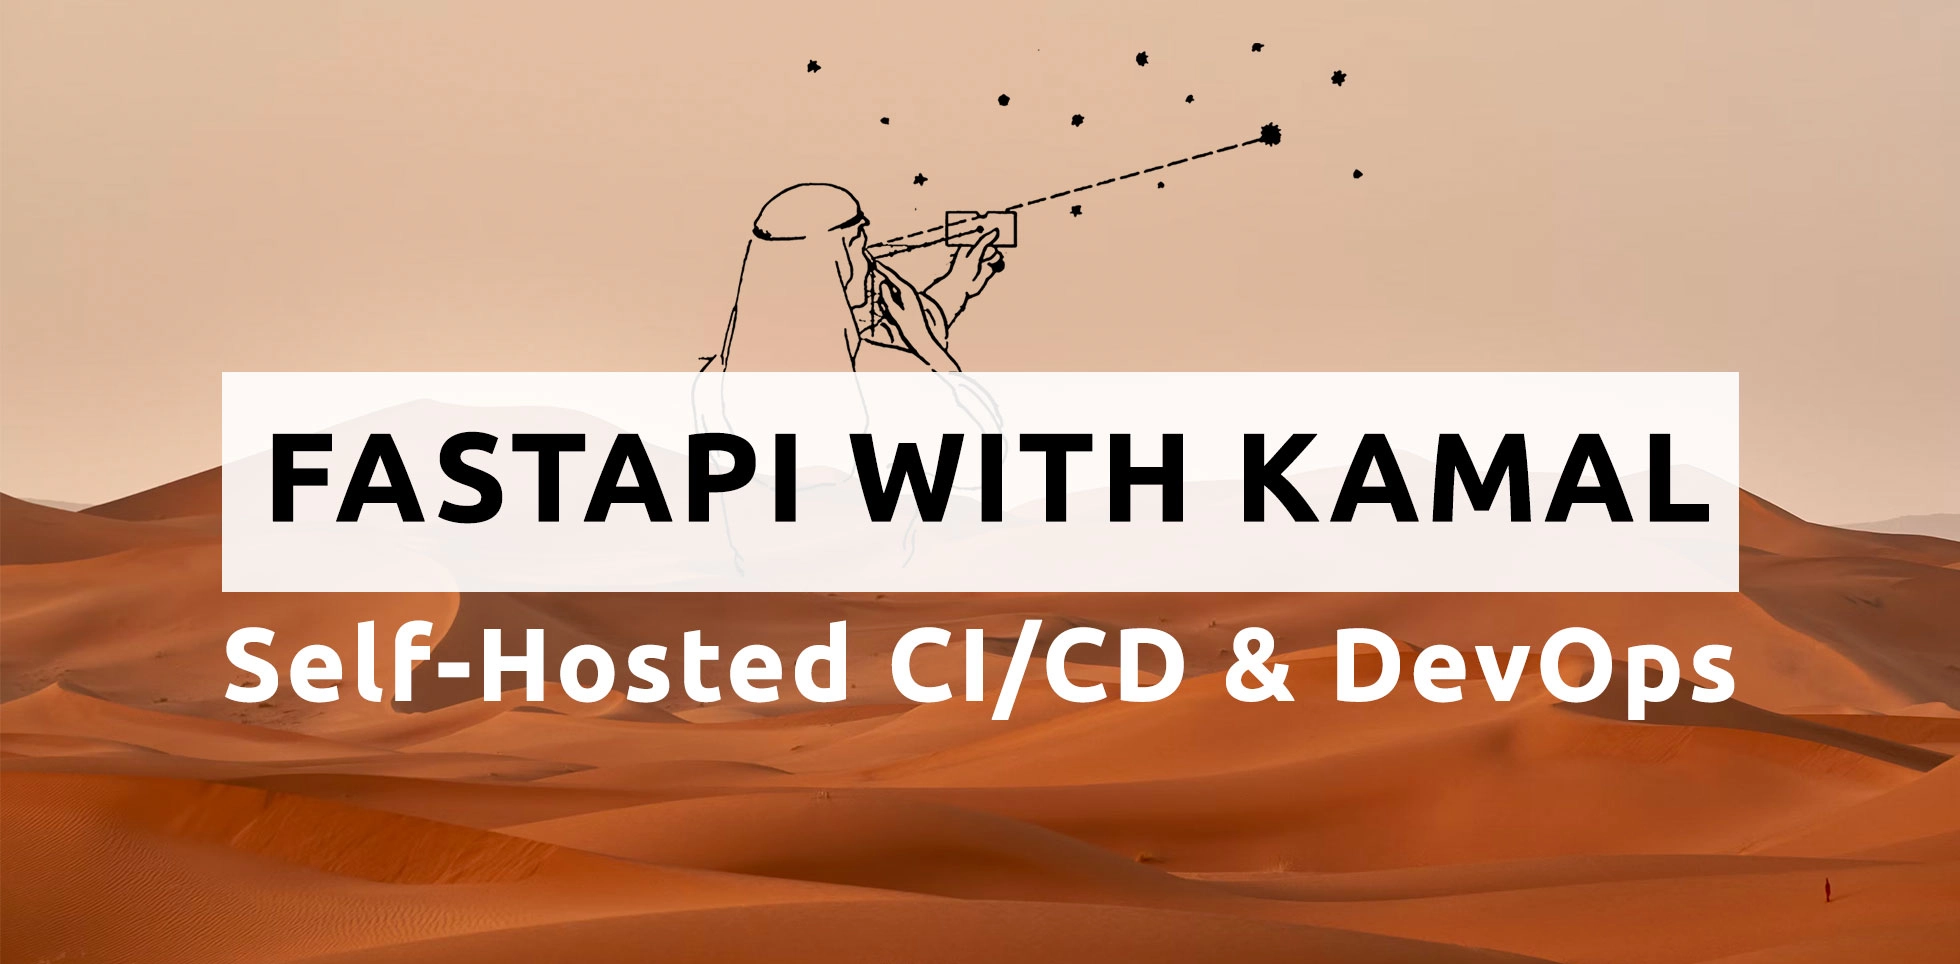 How to Deploy FastAPI with Kamal with Github Actions: Hetzner, CloudFlare, Github Actions. Self-Hosted DevOps for €5/mo 
